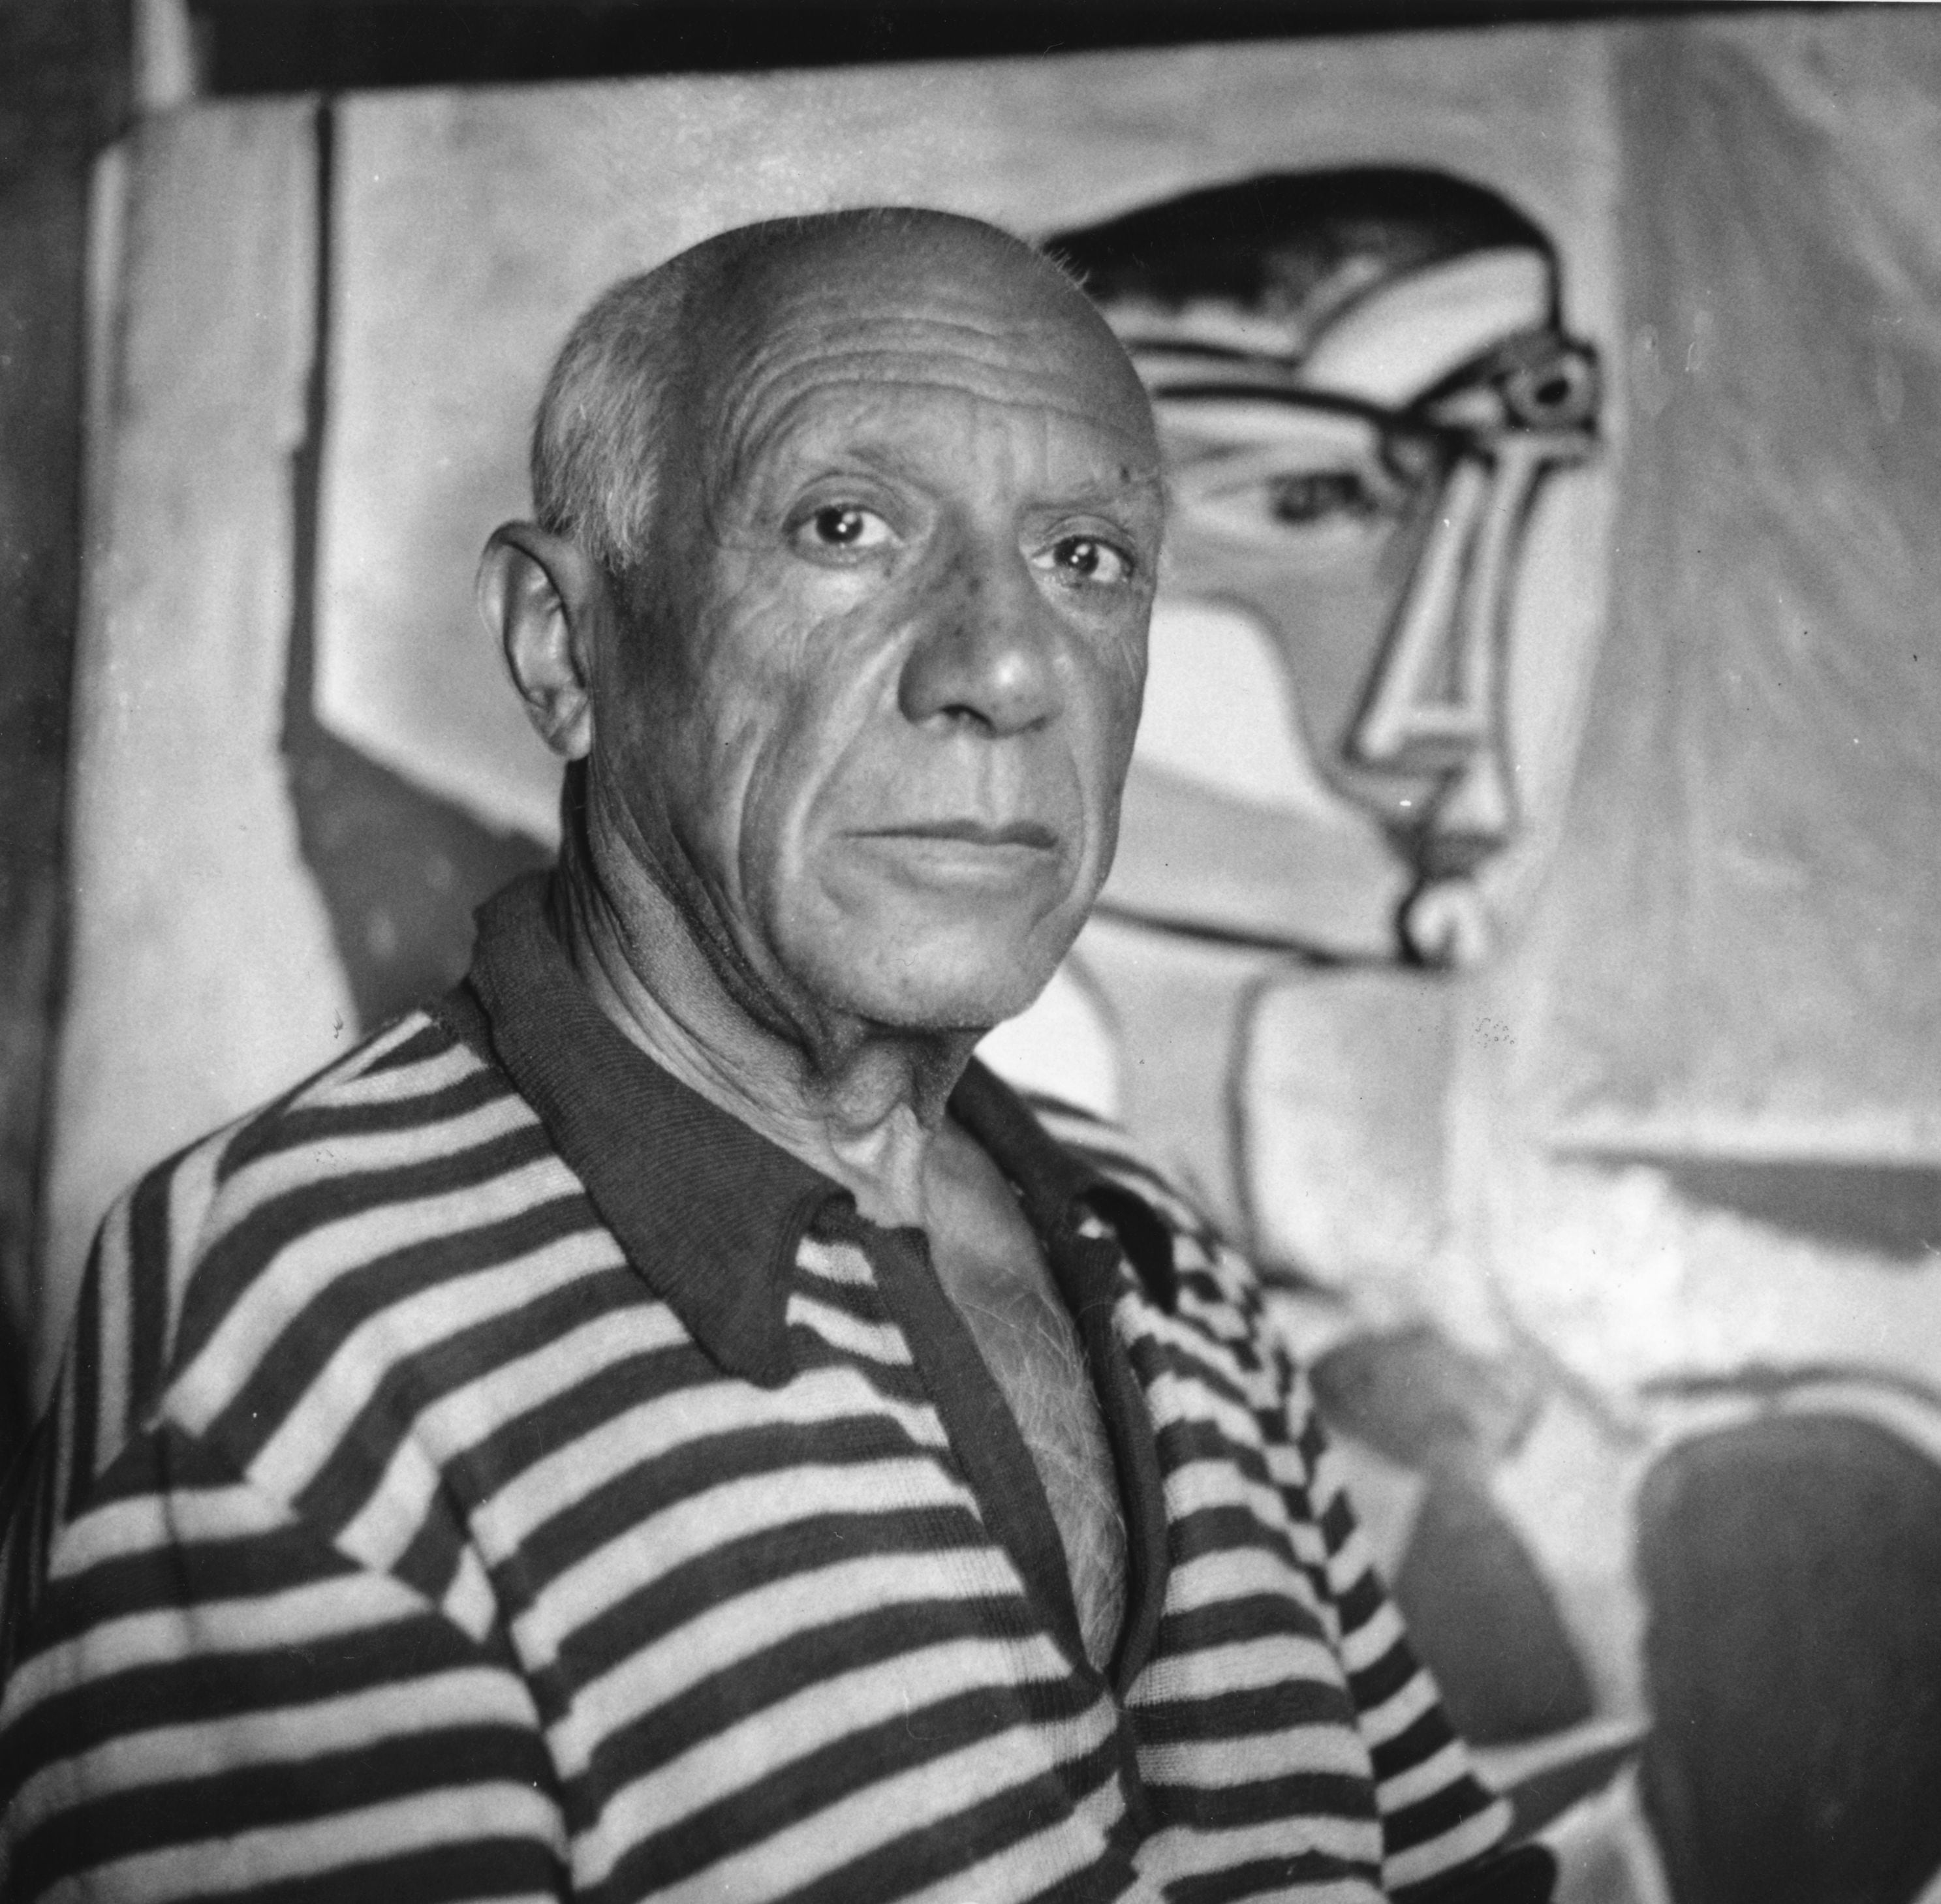 Picasso, in front of one of his paintings in his Cannes home.